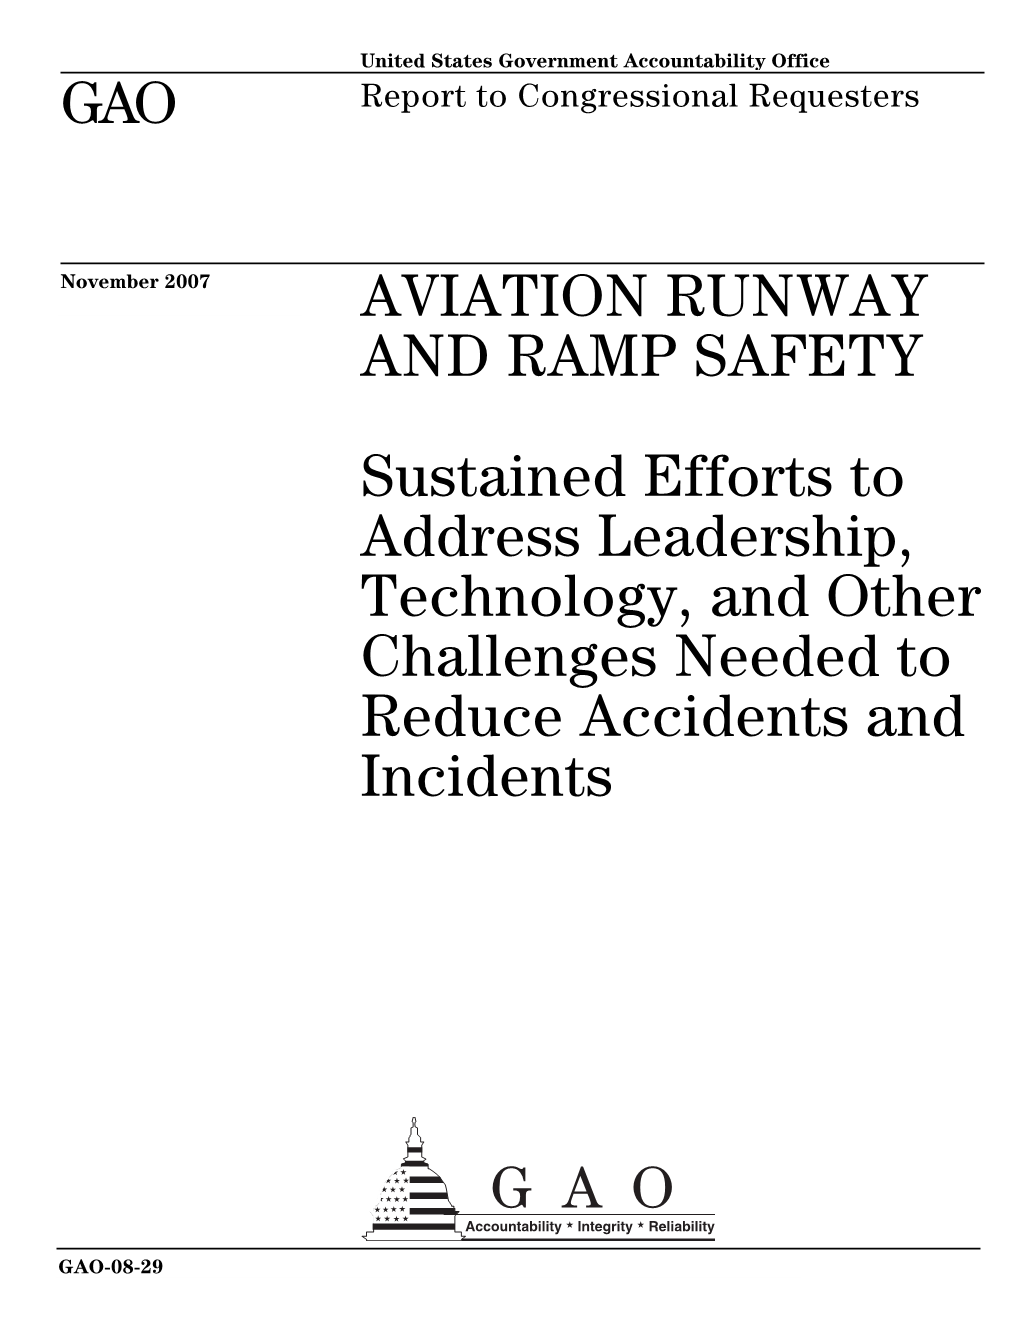 GAO-08-29 Aviation Runway and Ramp Safety: Sustained Efforts To